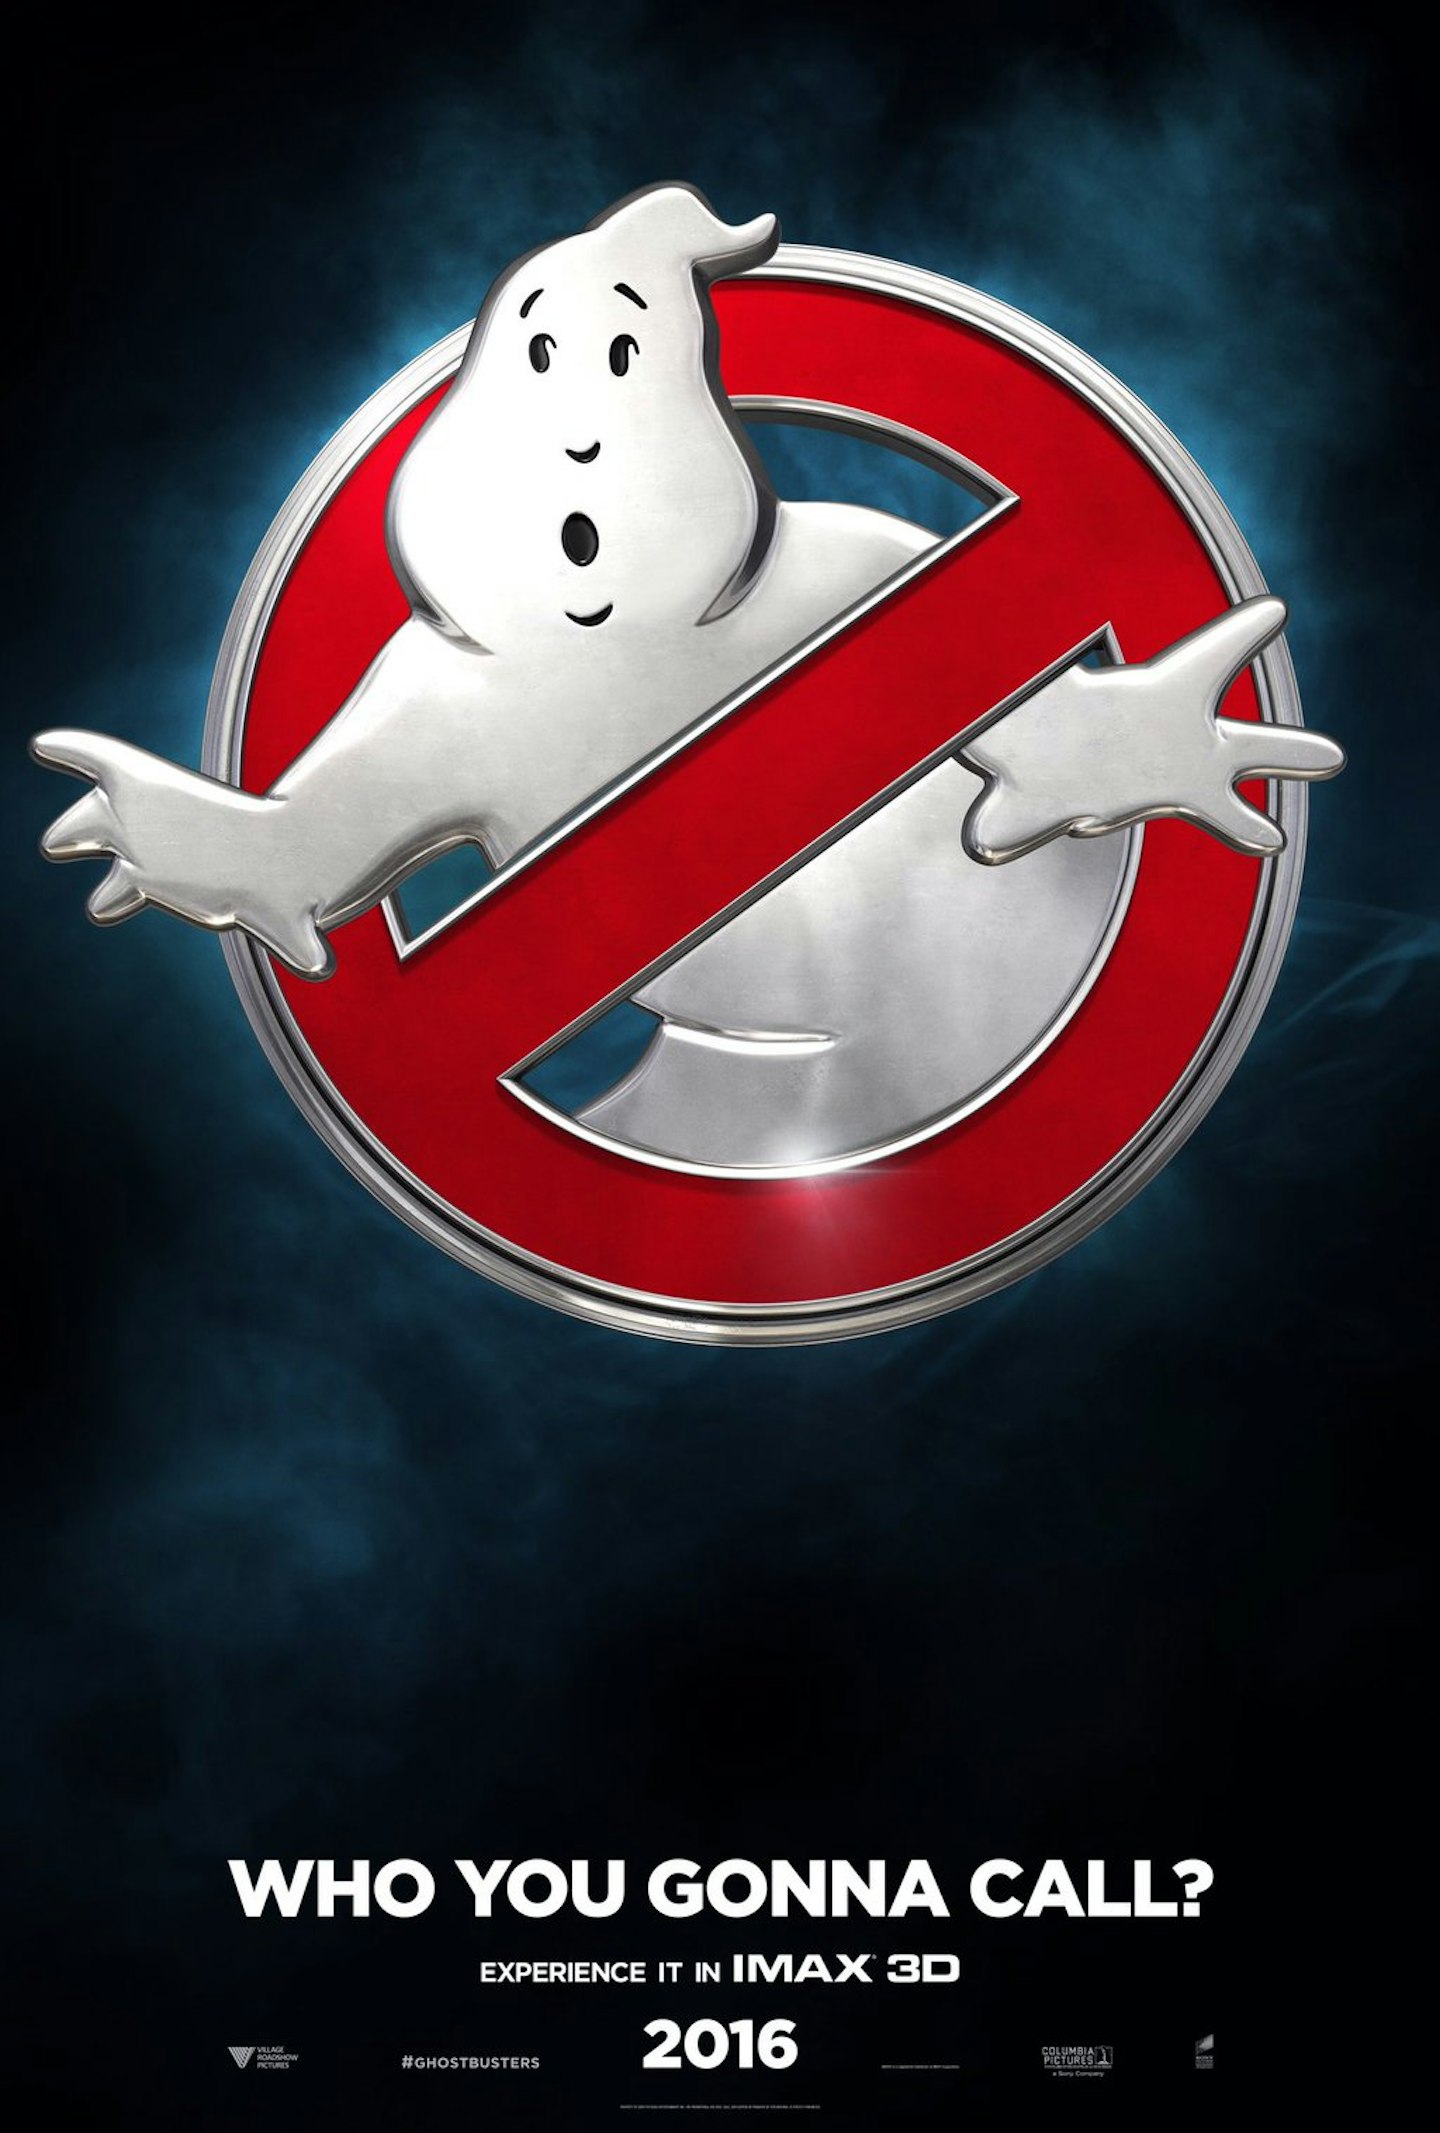 Ghostbusters teaser poster